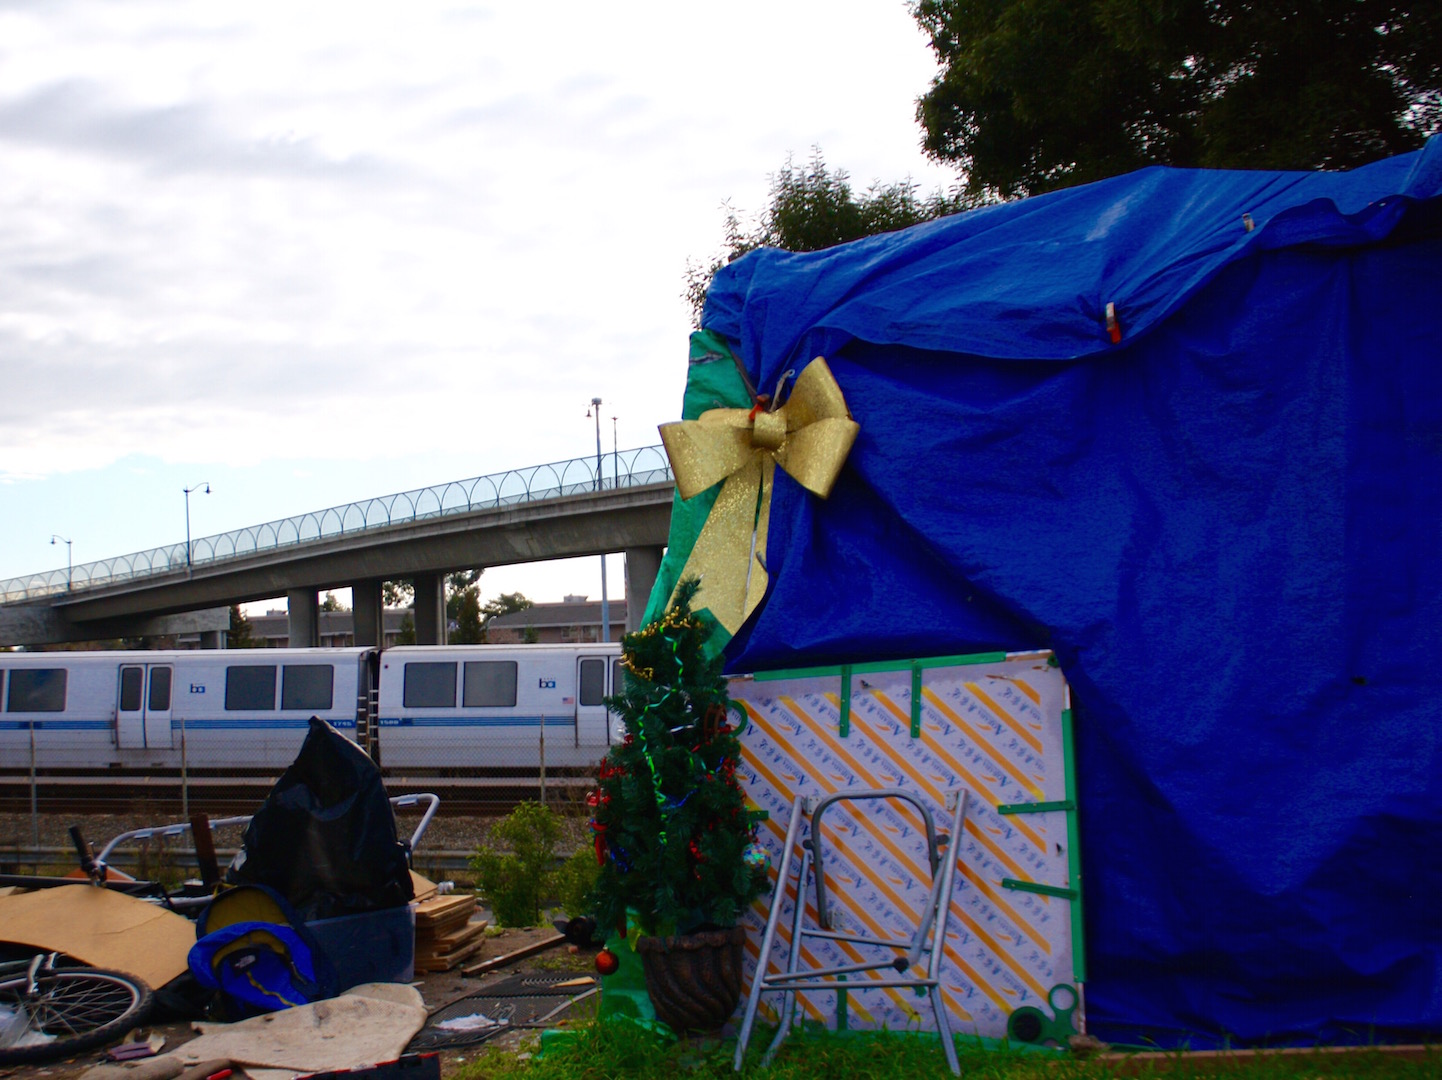 Many people have their first experience with homelessness in their 50s in Oakland